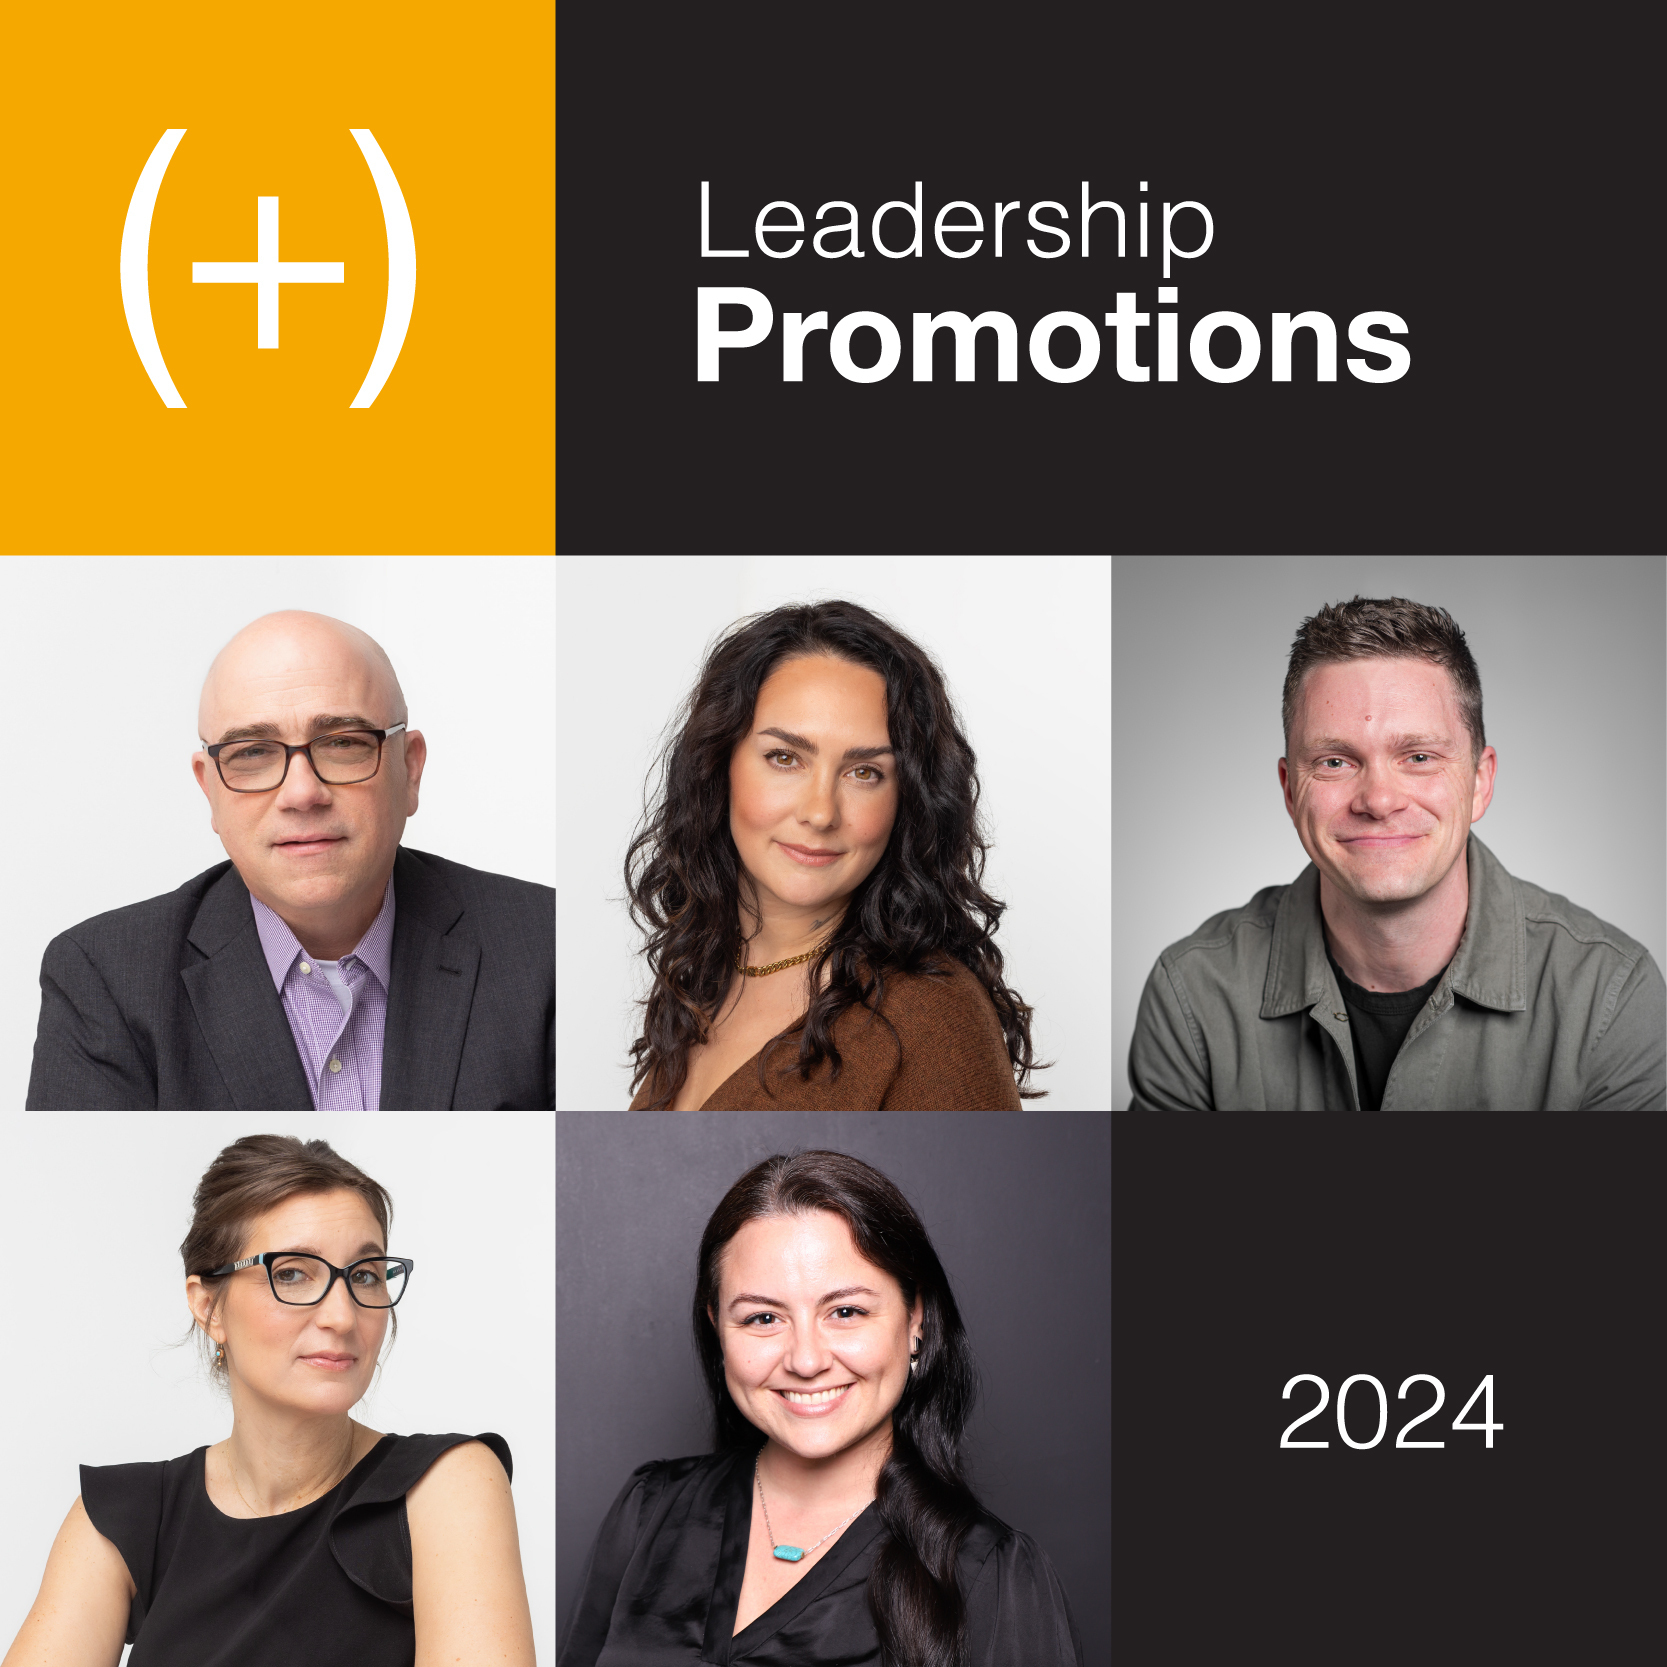 Photos of (add)ventures employees promoted to leadership roles in 2024.